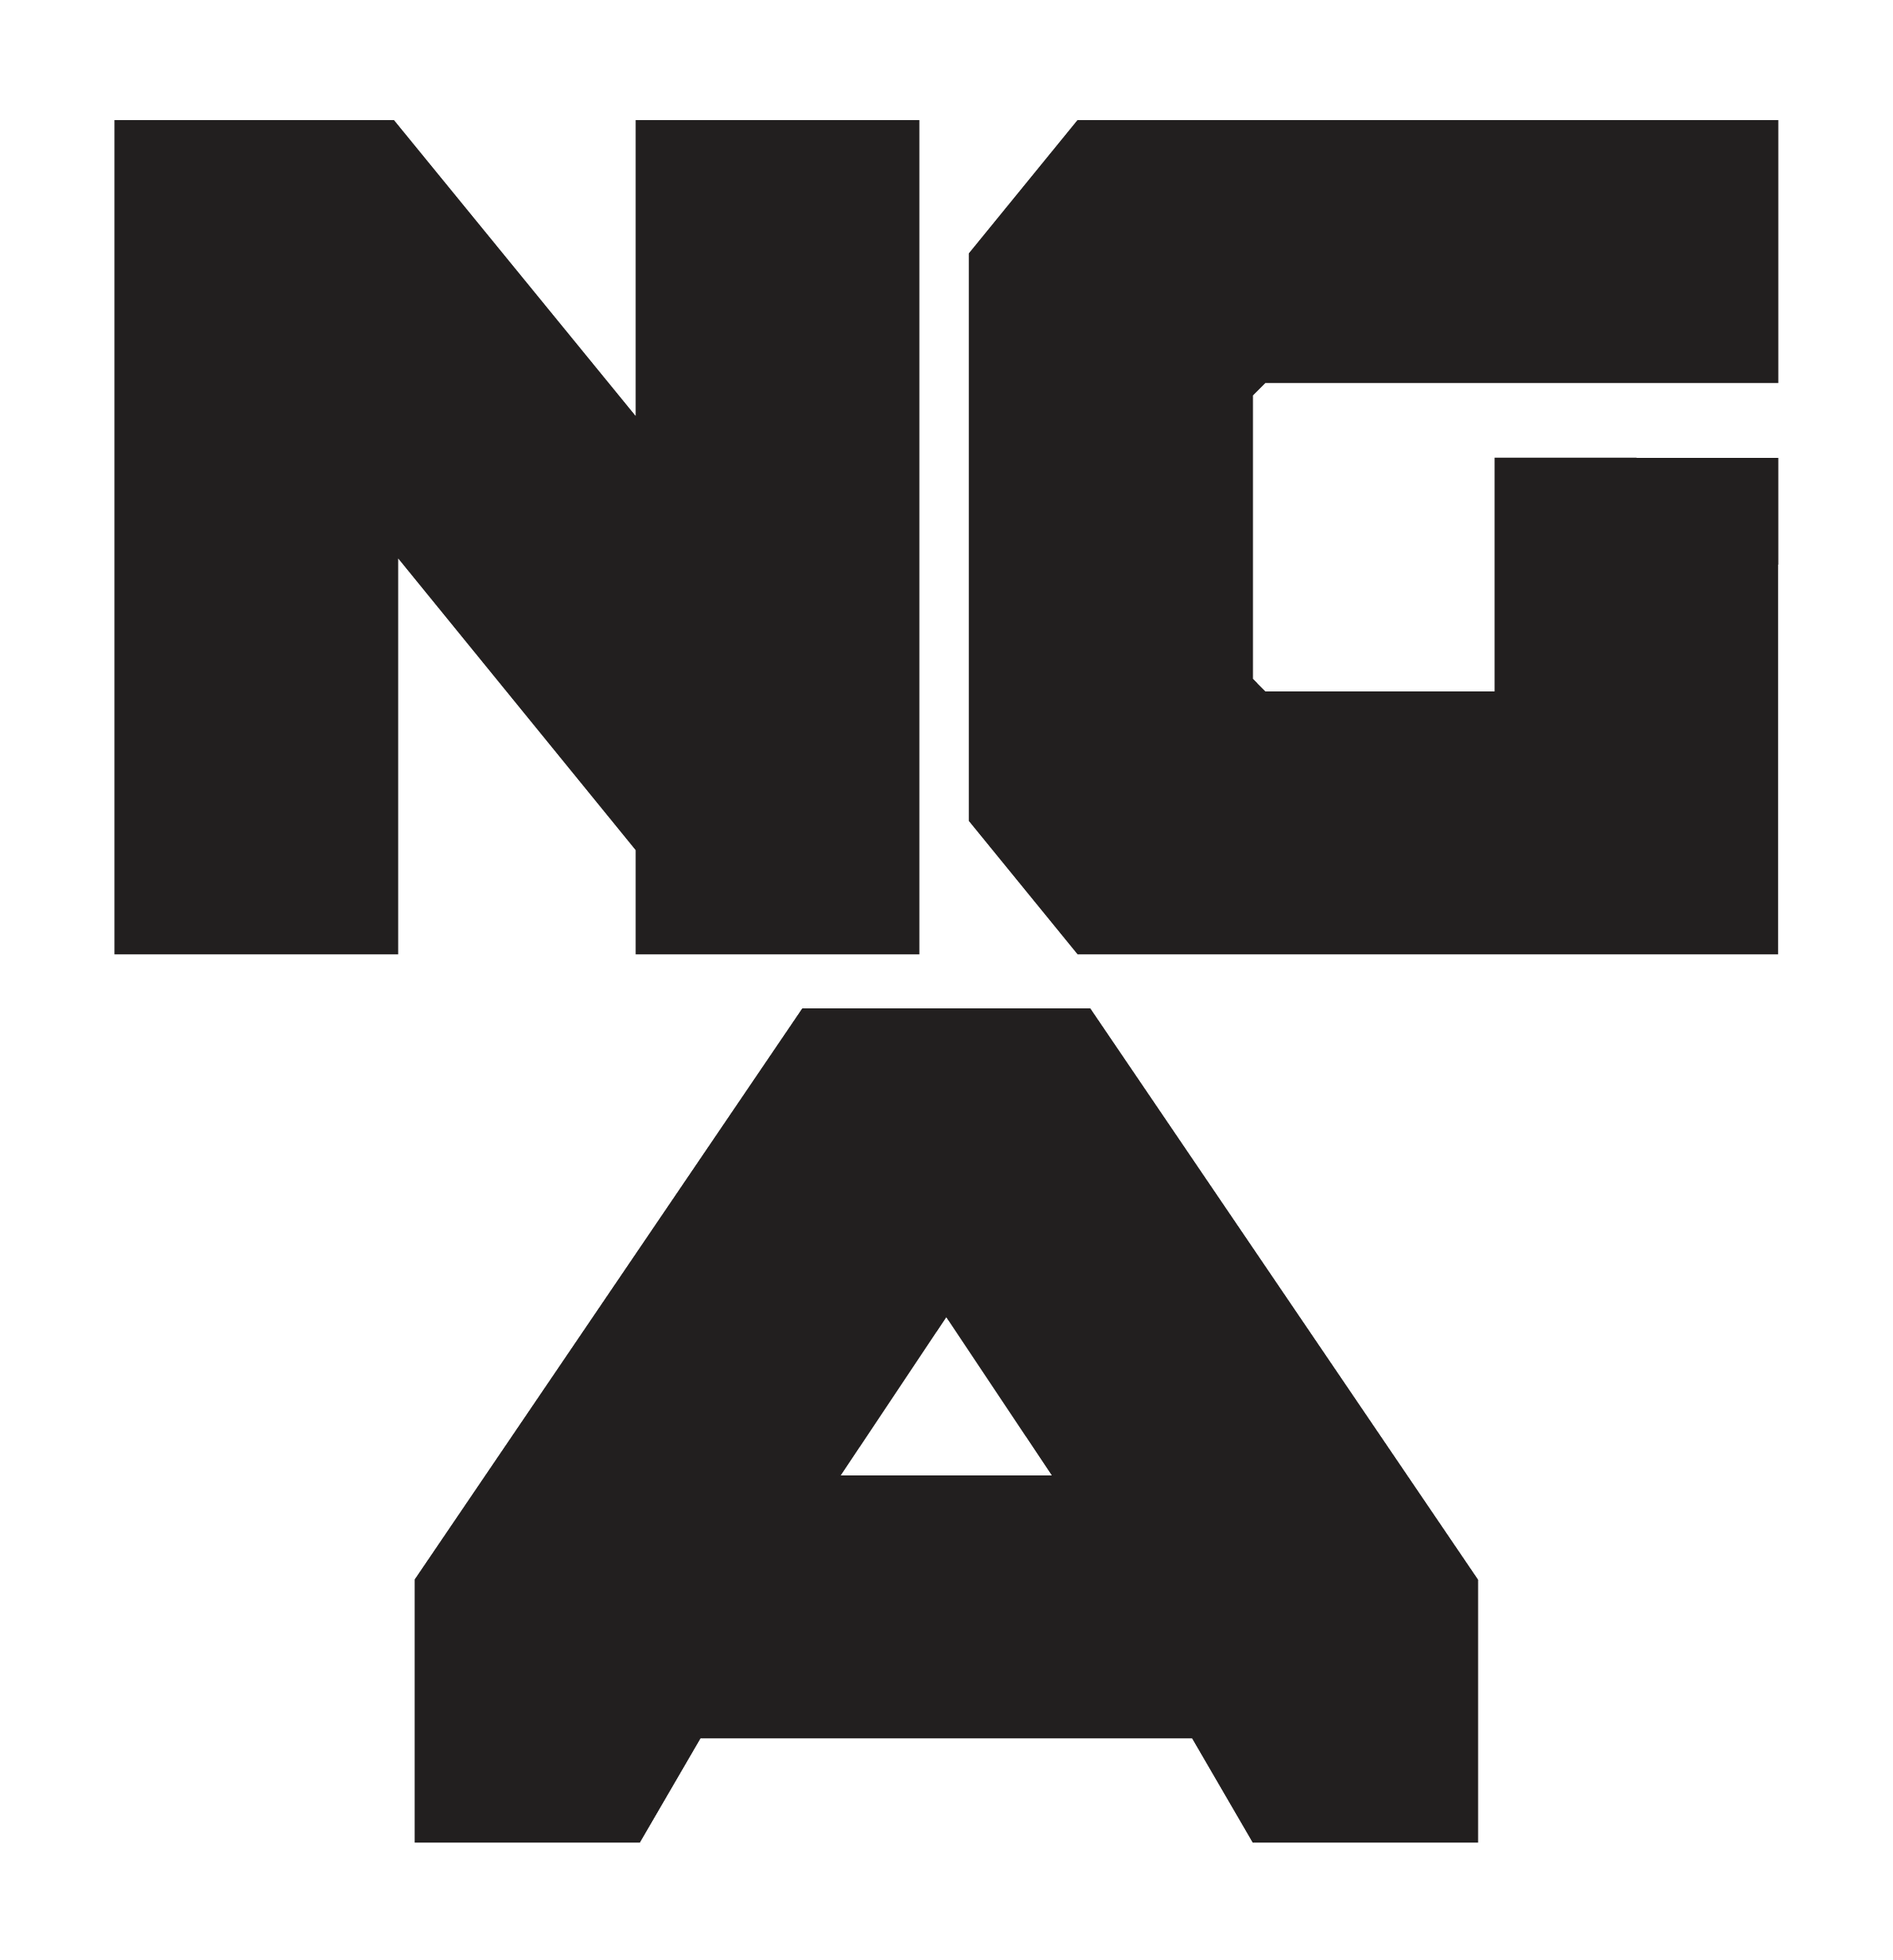 NGA logo In partnership with the National Gallery of Australia.